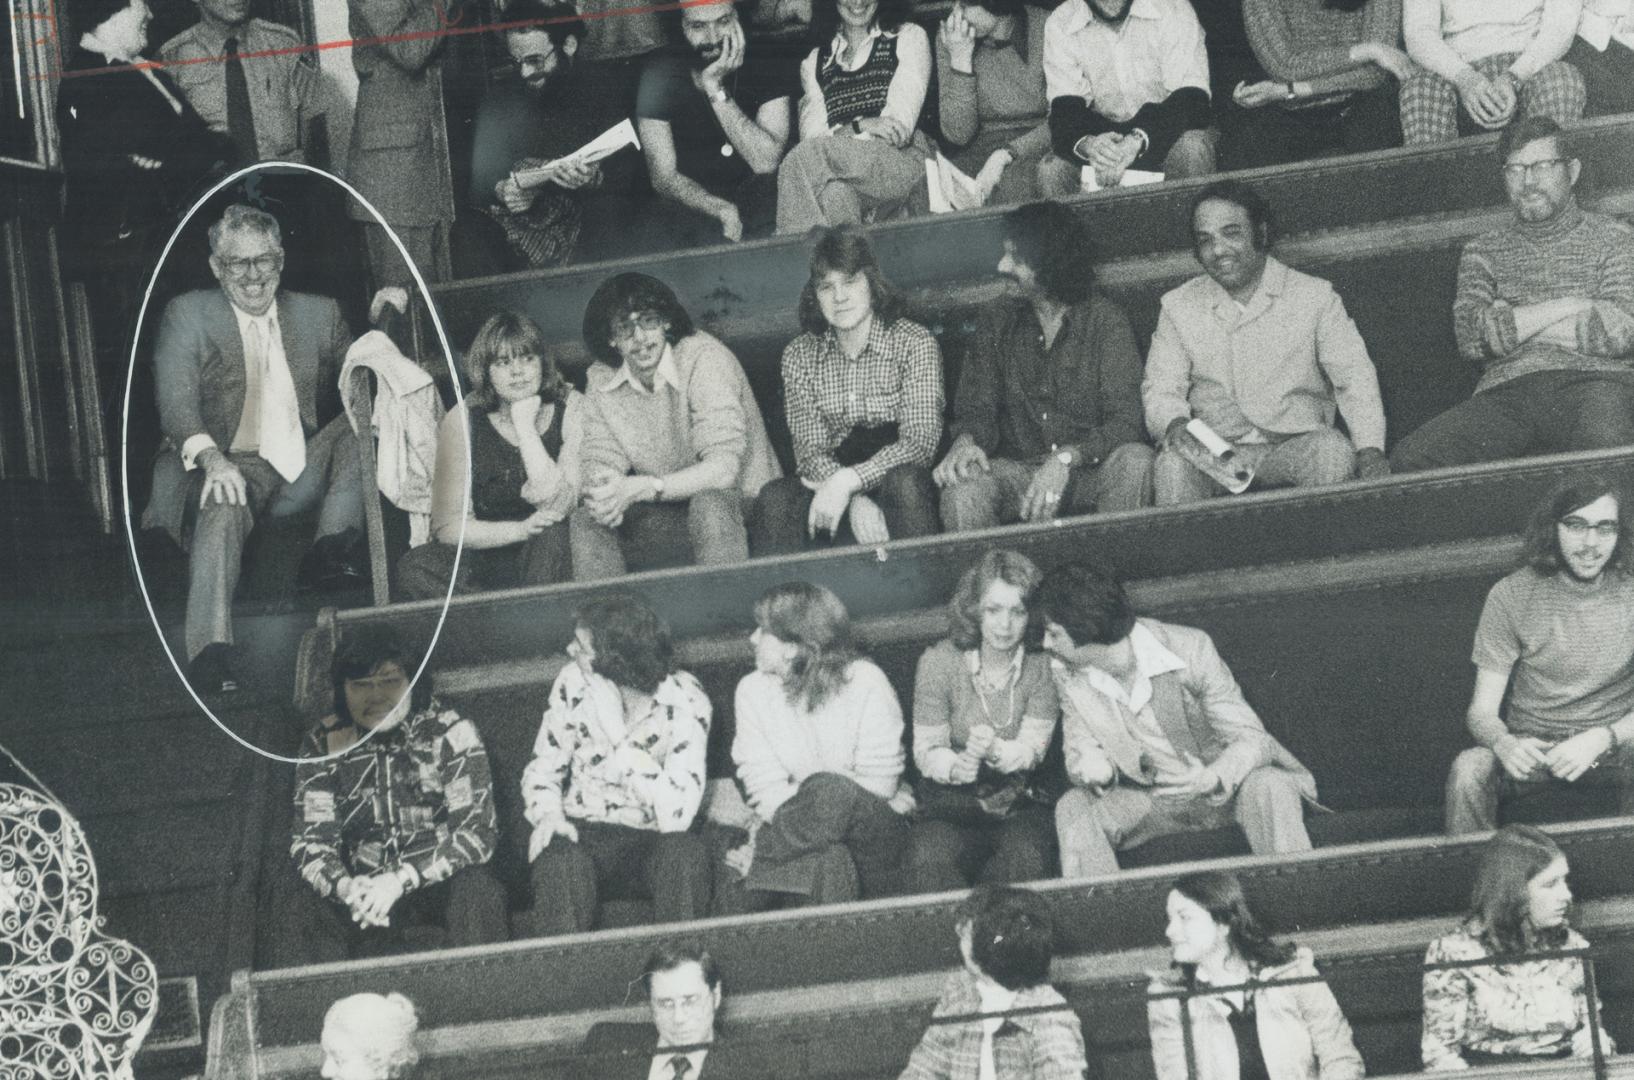 A Crazy night in the Legislature was marked by Liberal MPP Eddie Sargent (circled) sitting on the stairs in the public gallery, and smiling at his col(...)